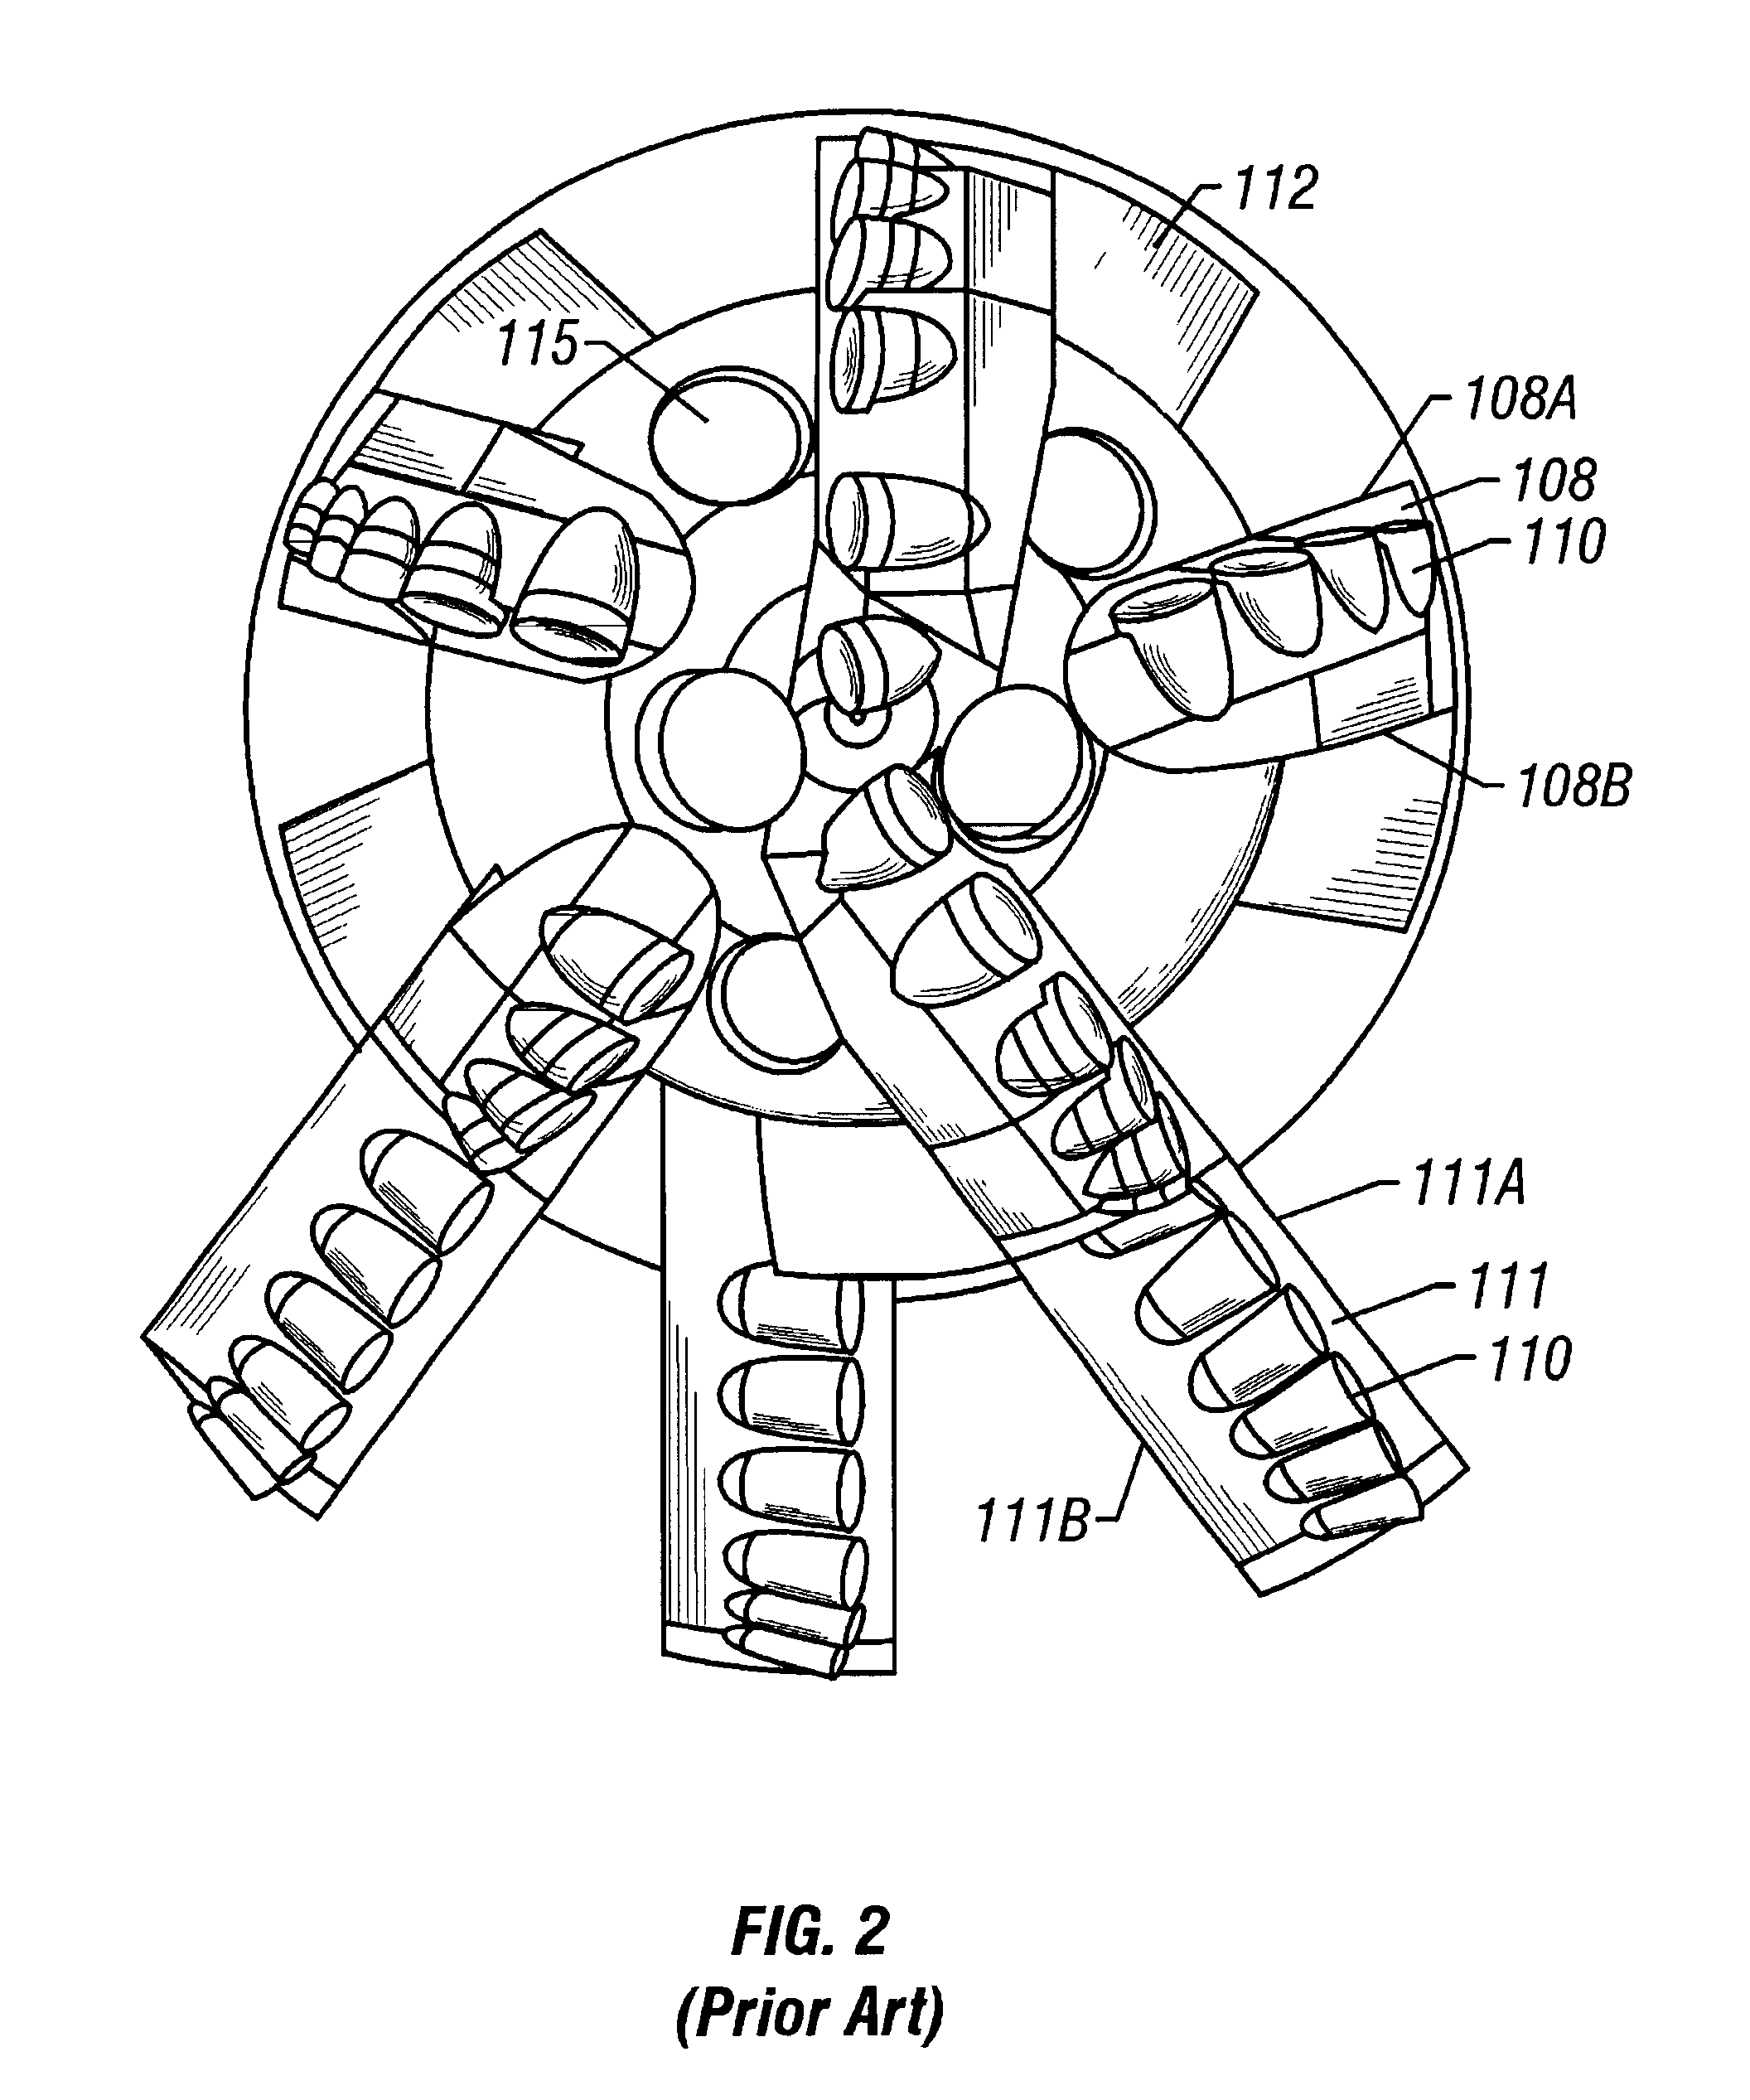 Bi-centered drill bit having improved drilling stability mud hydraulics and resistance to cutter damage